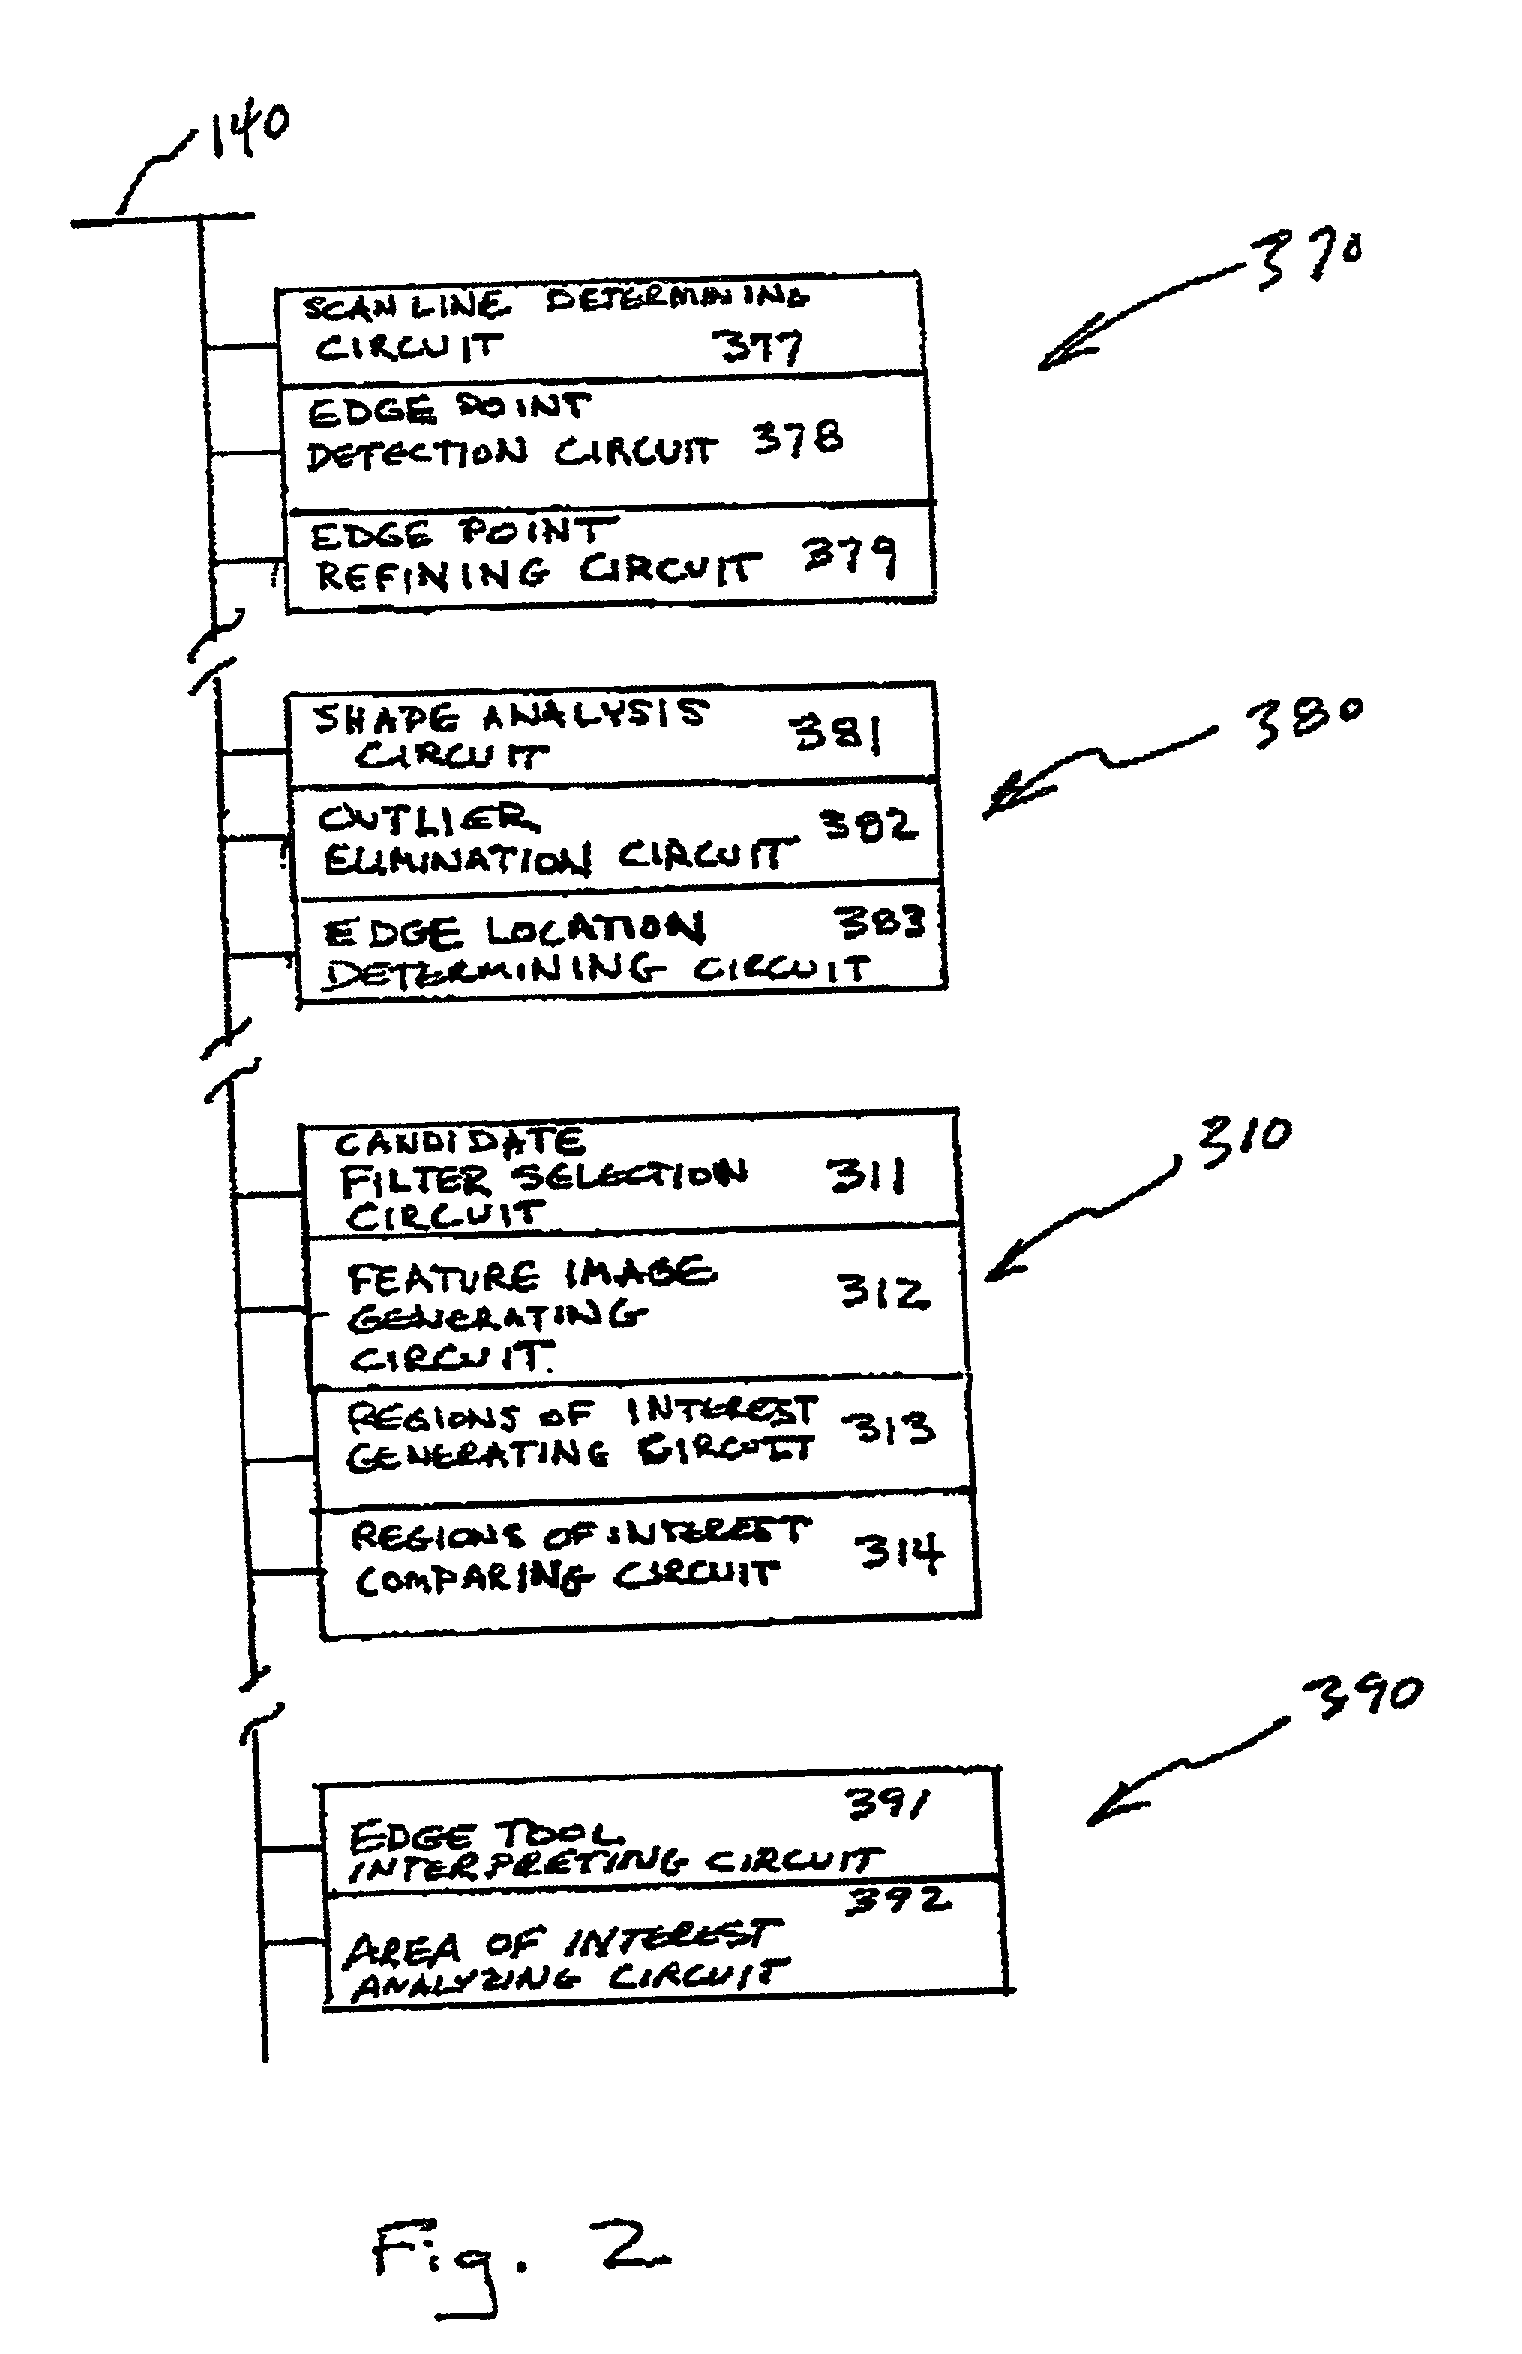 Systems and methods for boundary detection in images